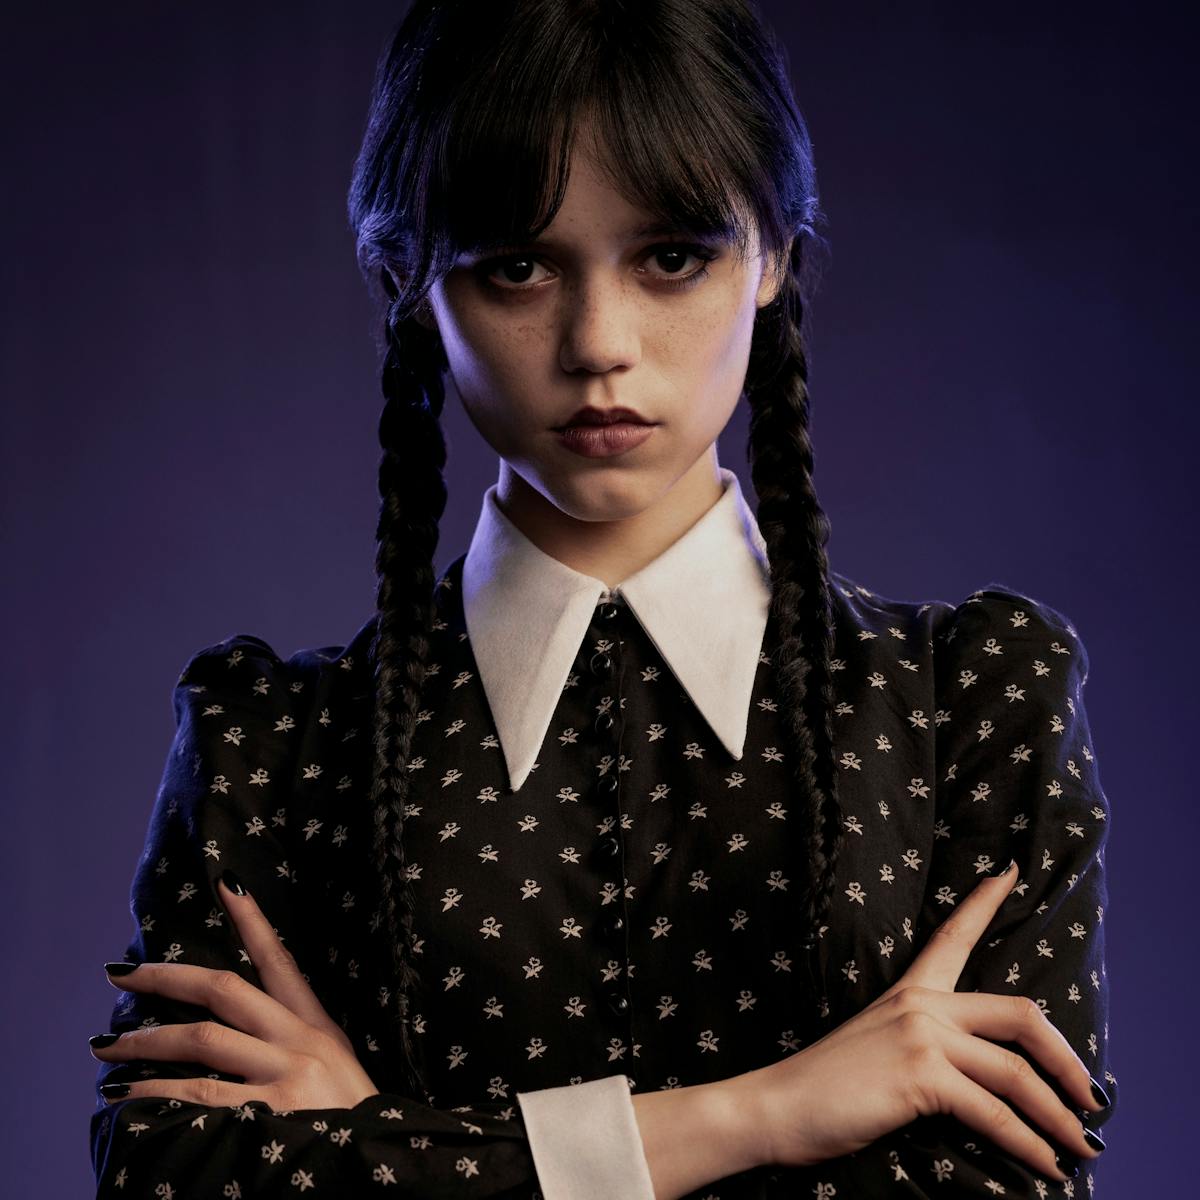 Wednesday Addams (Jenna Ortega) wears a black dress with white polka dots and a triangular white collar and two braids against a purple background.